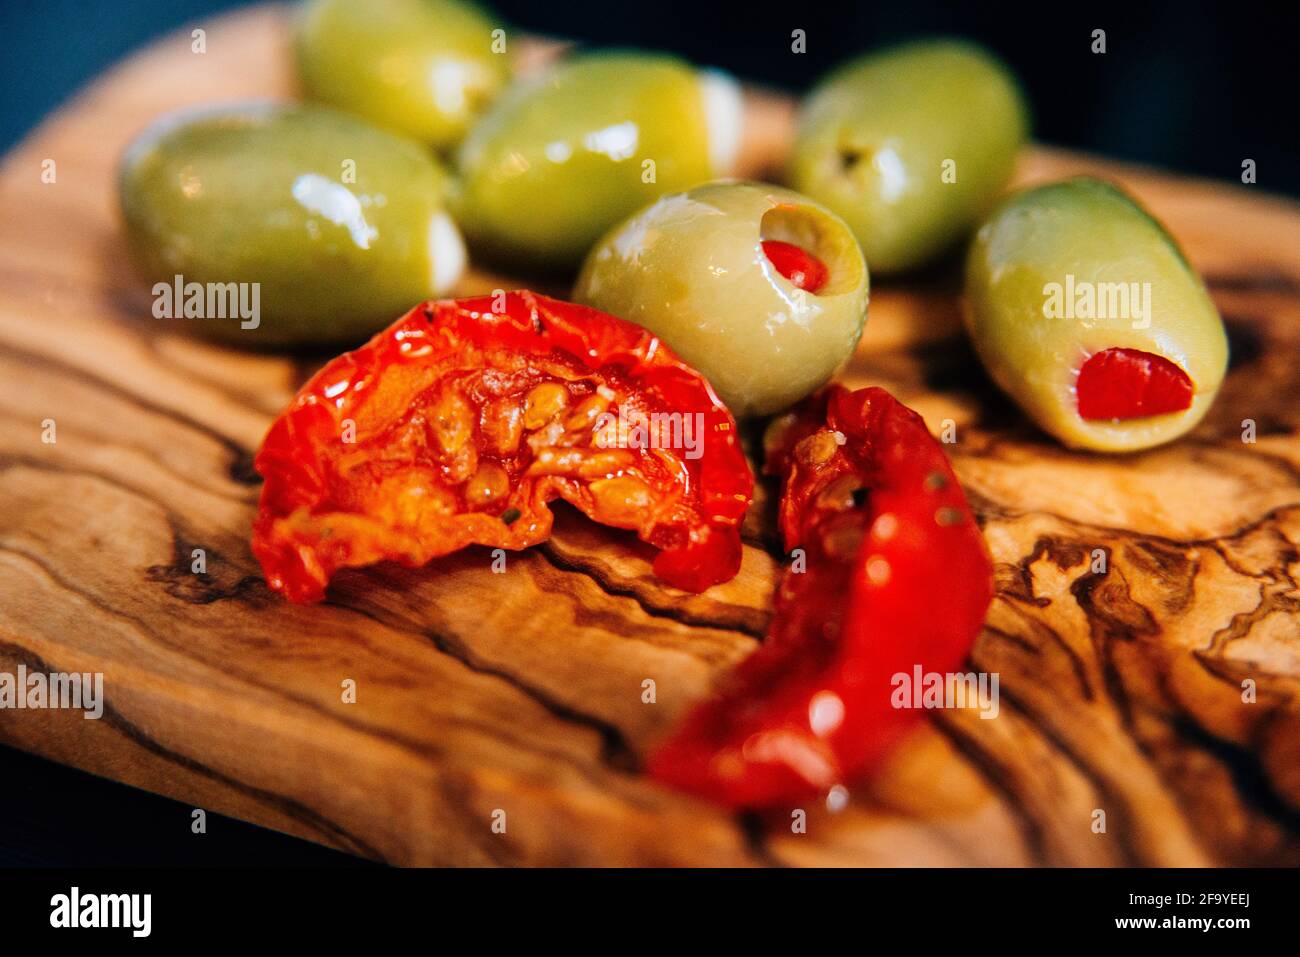 close up of a bamboo wood chopping board with sun dried tomatoes and olives Stock Photo